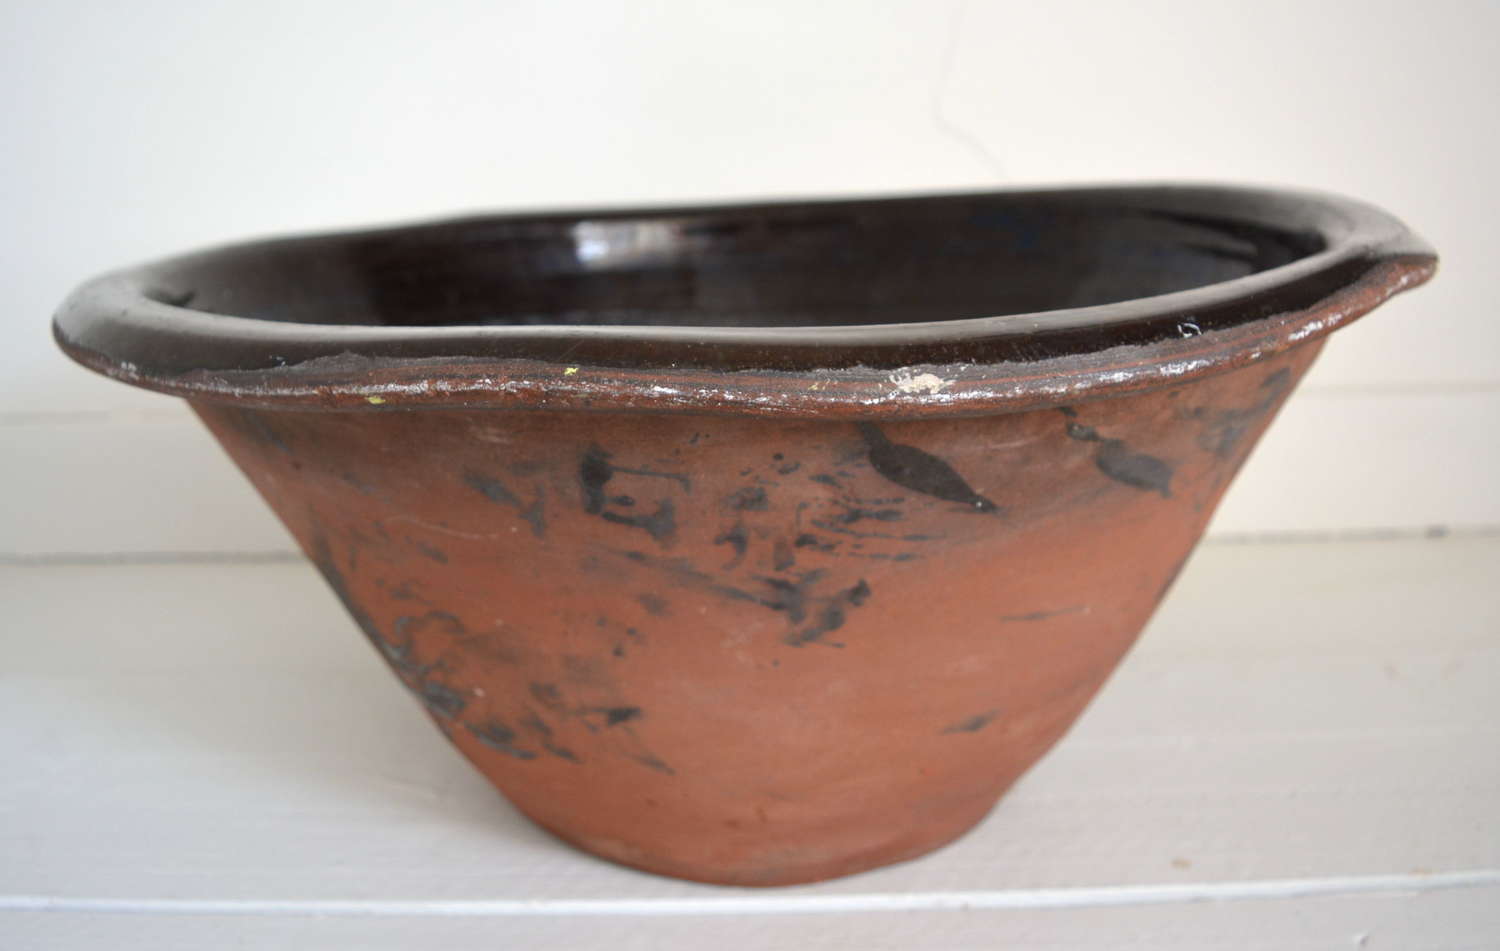 LARGE PANCHEON WITH BLACK GLAZE